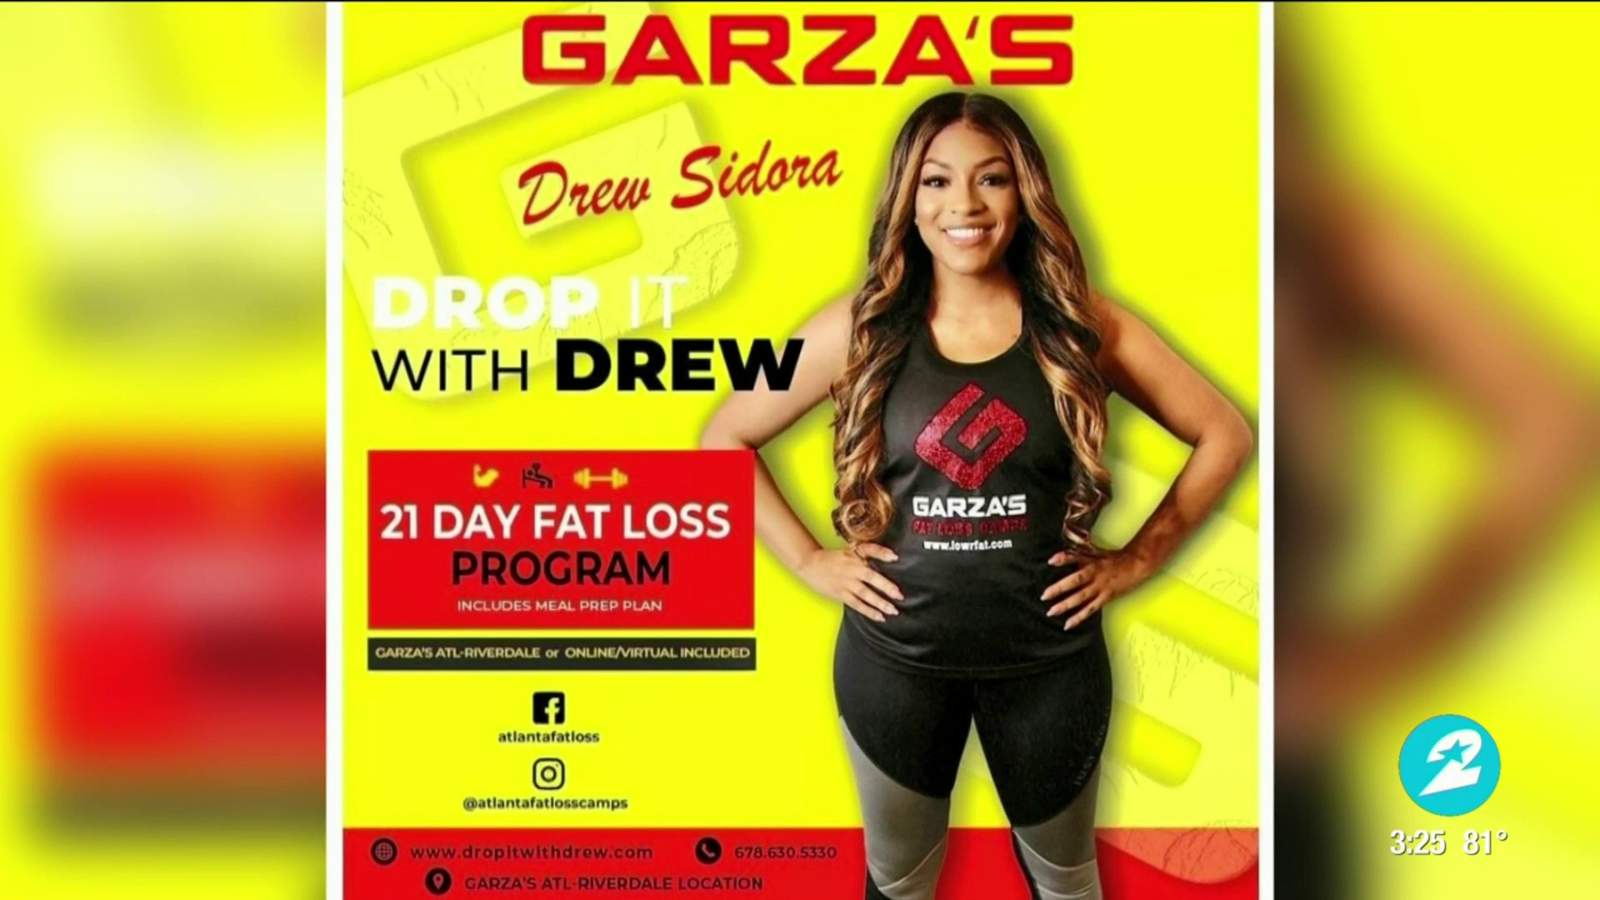 Real Housewives of Atlanta star helping women with a new virtual fitness program